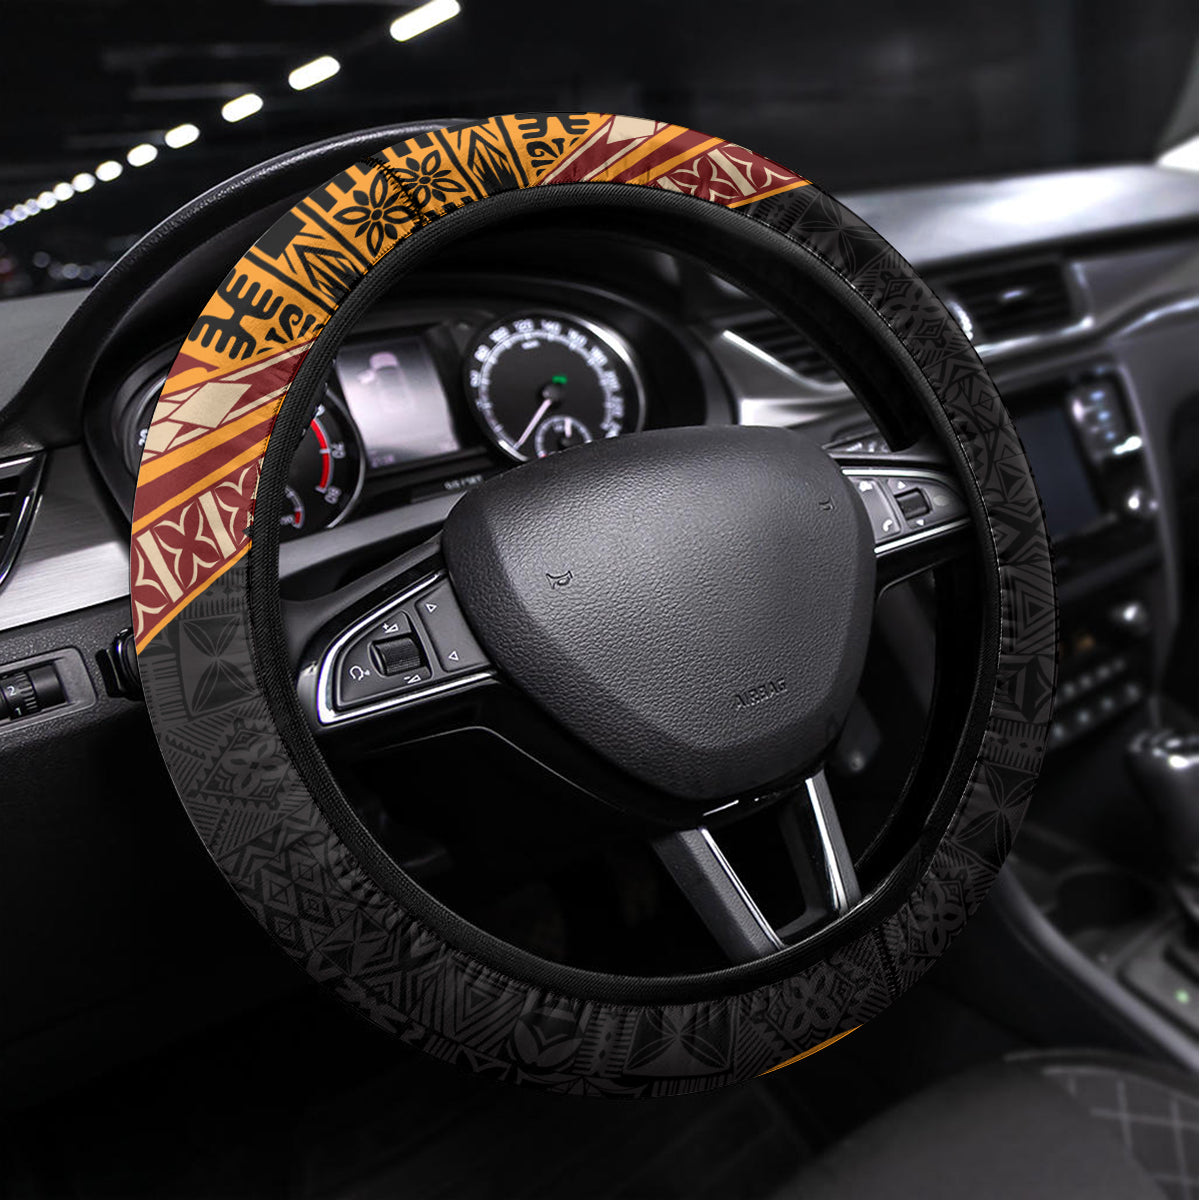 Samoa Siapo Motif and Tapa Pattern Half Style Steering Wheel Cover Yellow Color